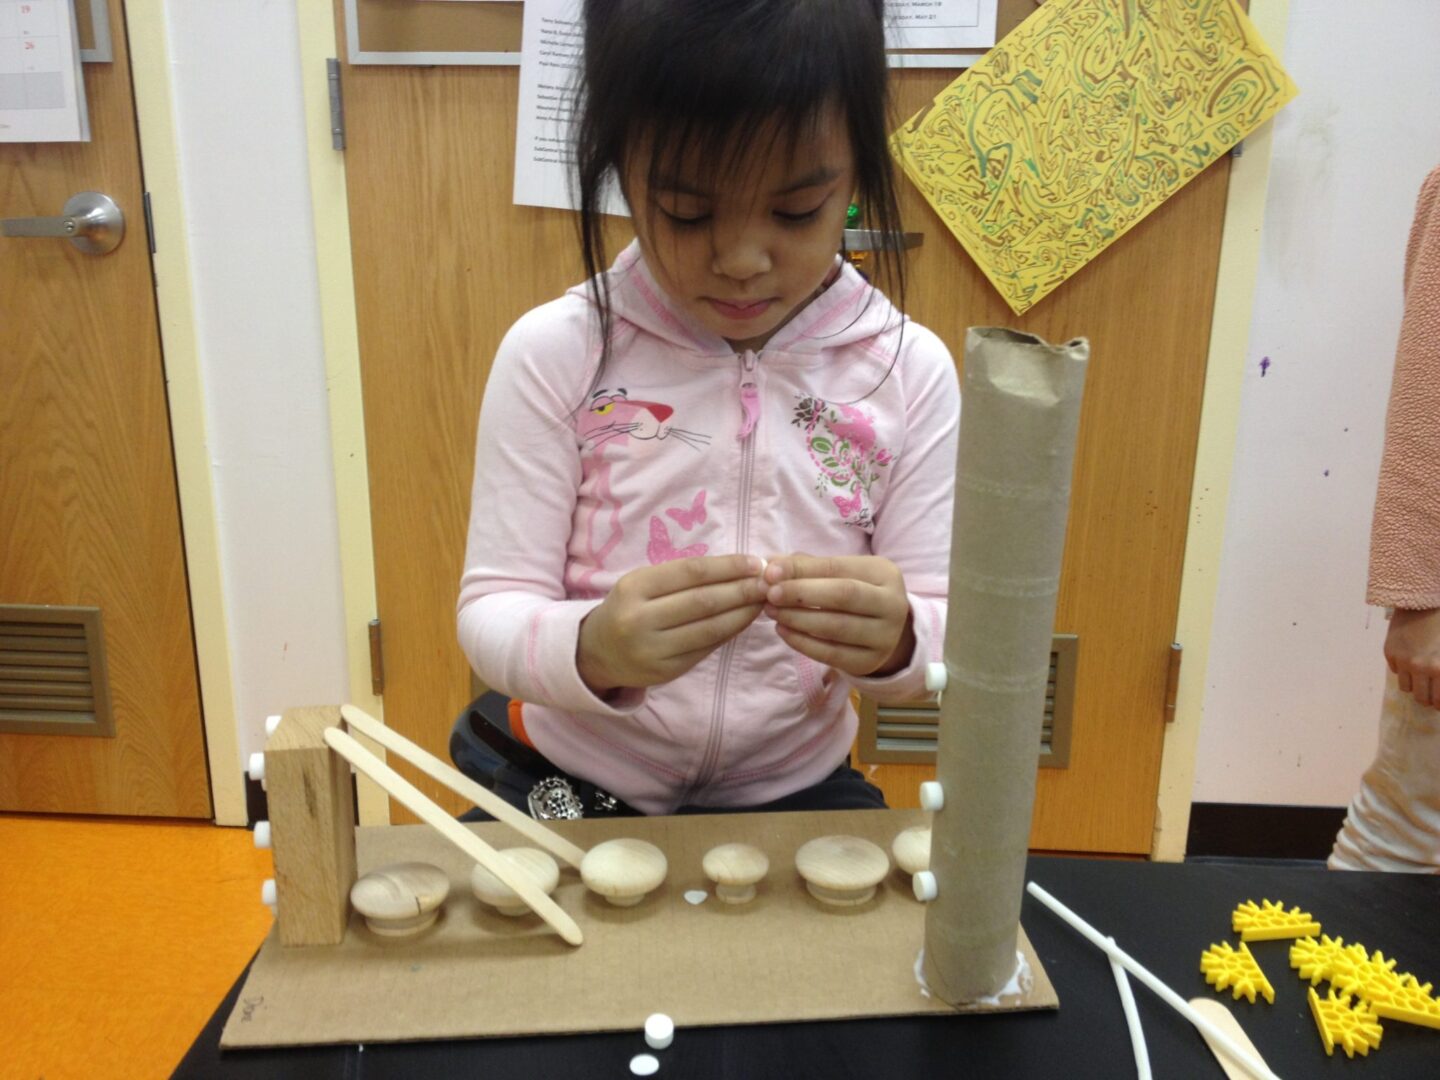 A girl is making a model of a bridge out of paper.